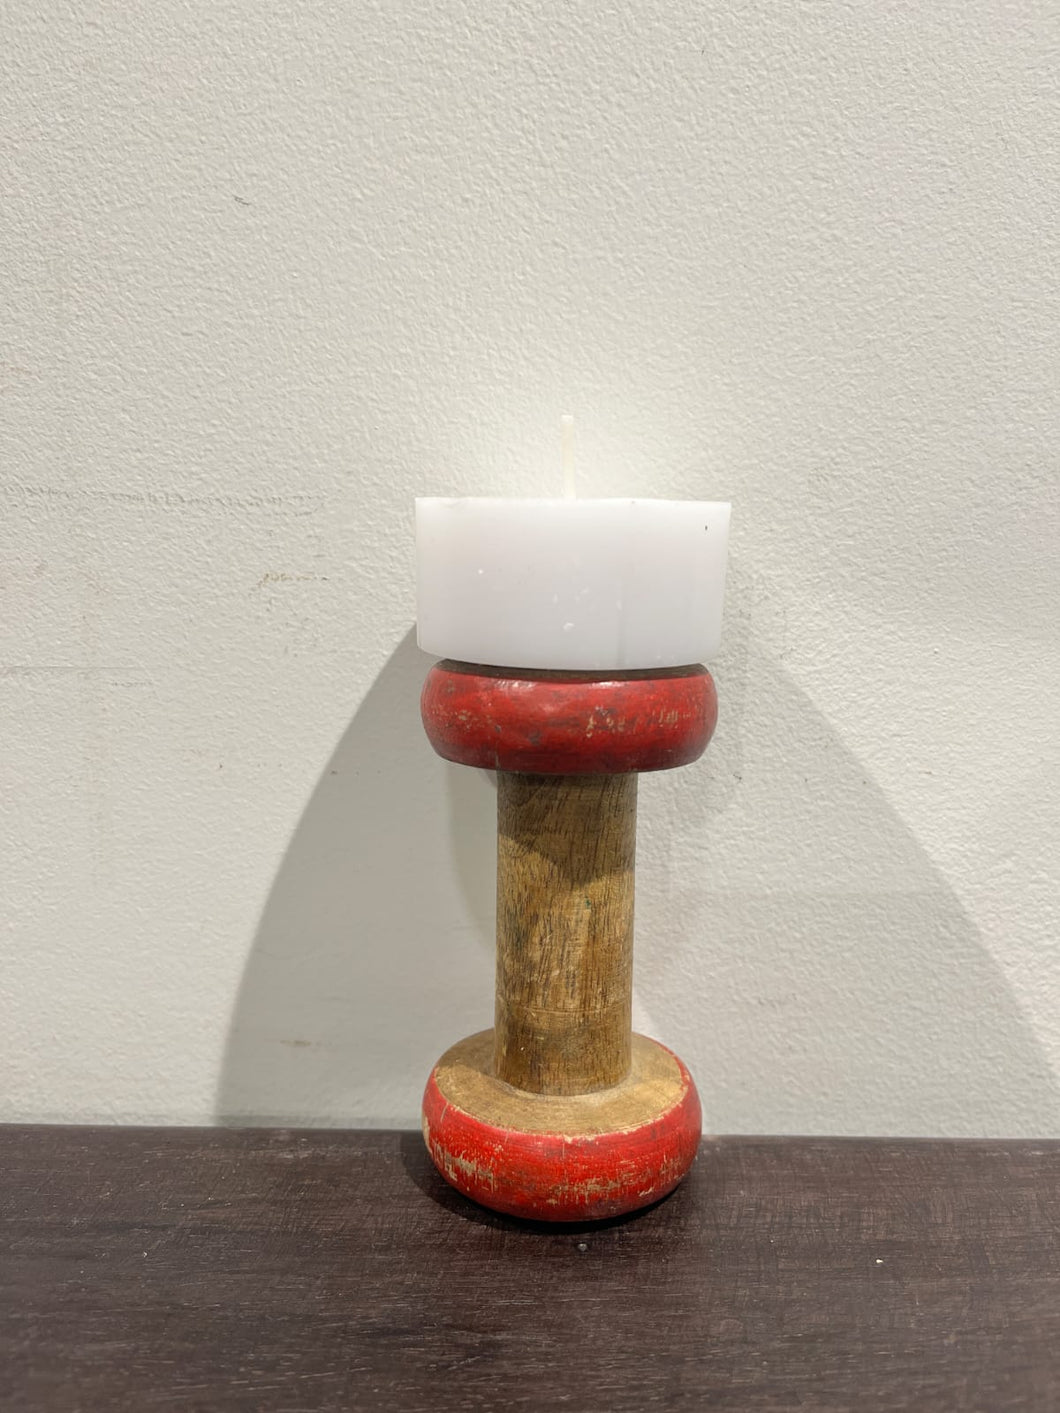 Small Candle Holder